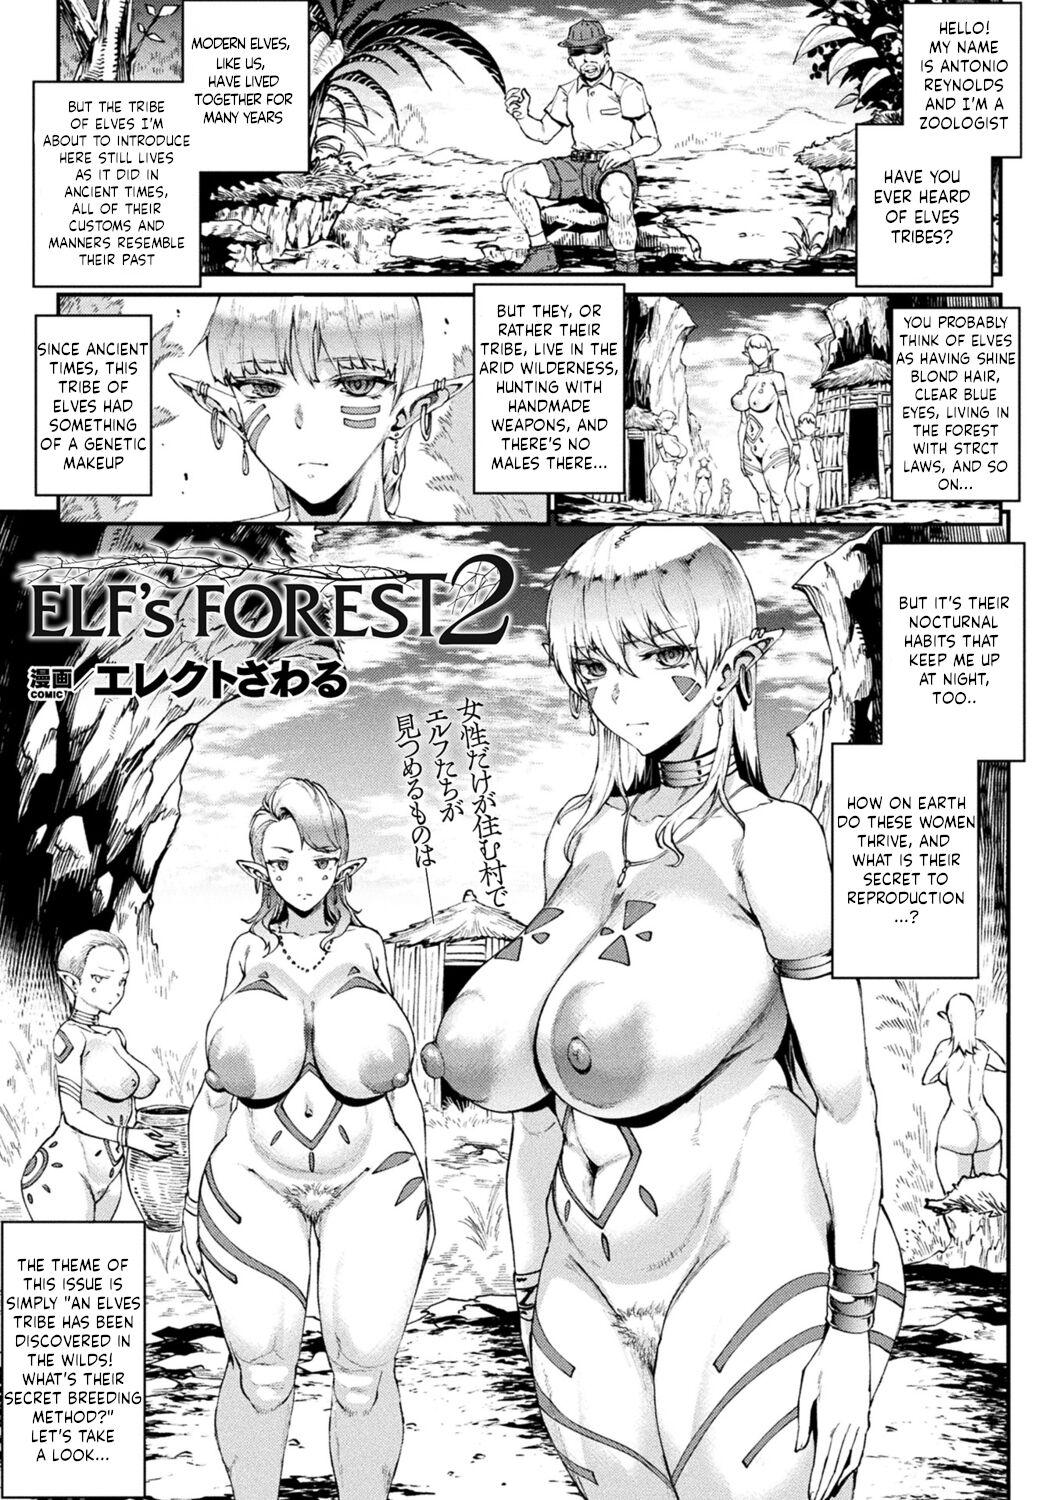 Elf's Forest 2 1